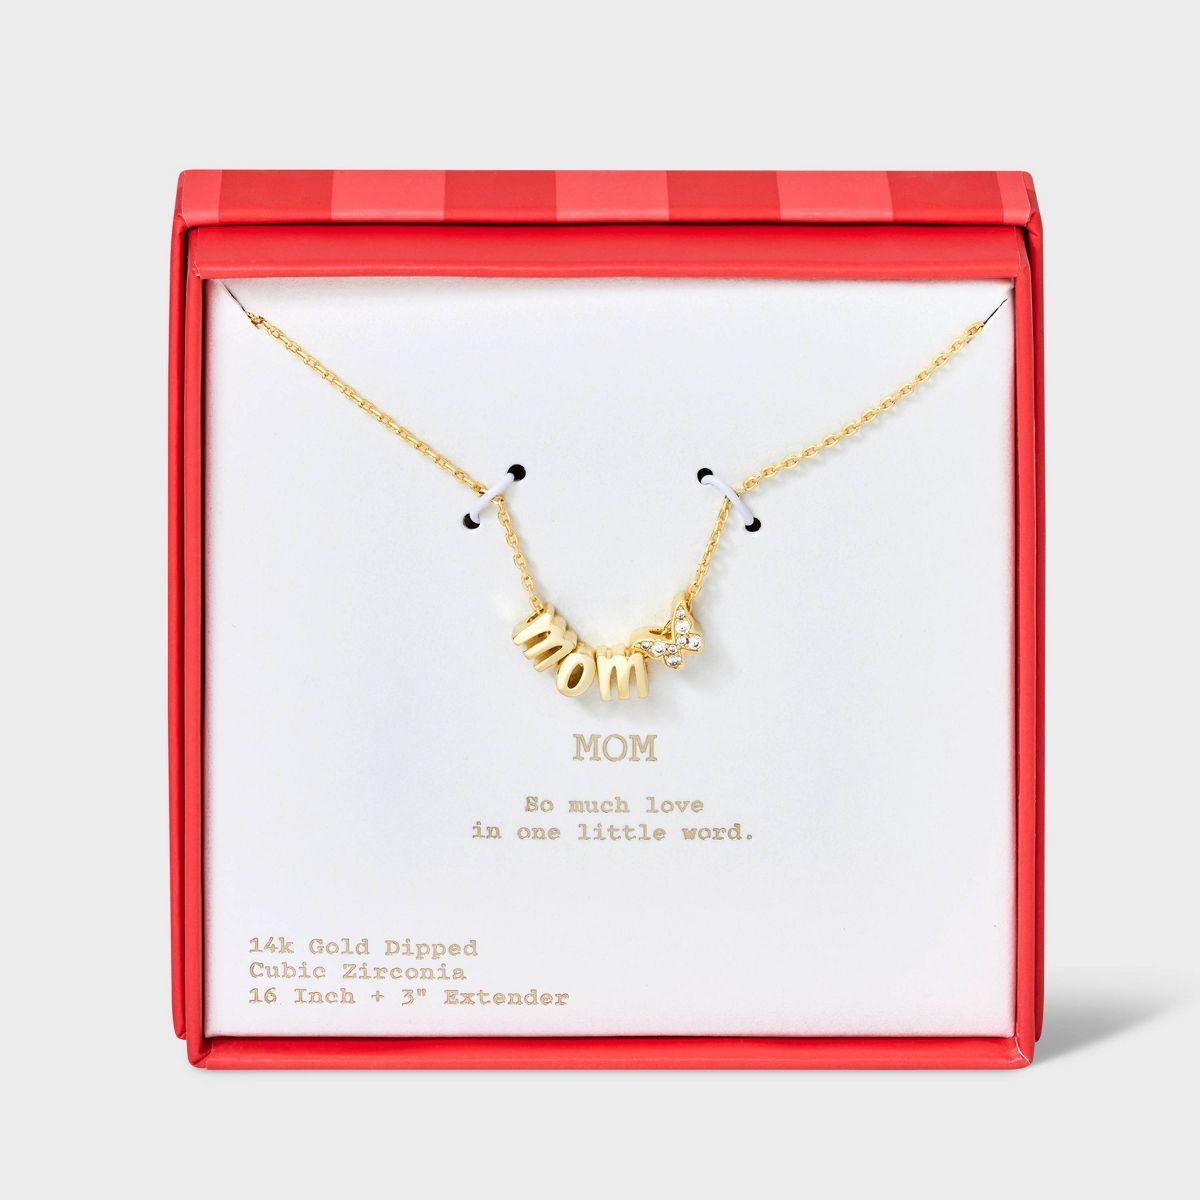 14k Gold Dipped "MOM" with Cubic Zirconia Butterfly Slider Pendant Necklace - A New Day™ Gold | Target